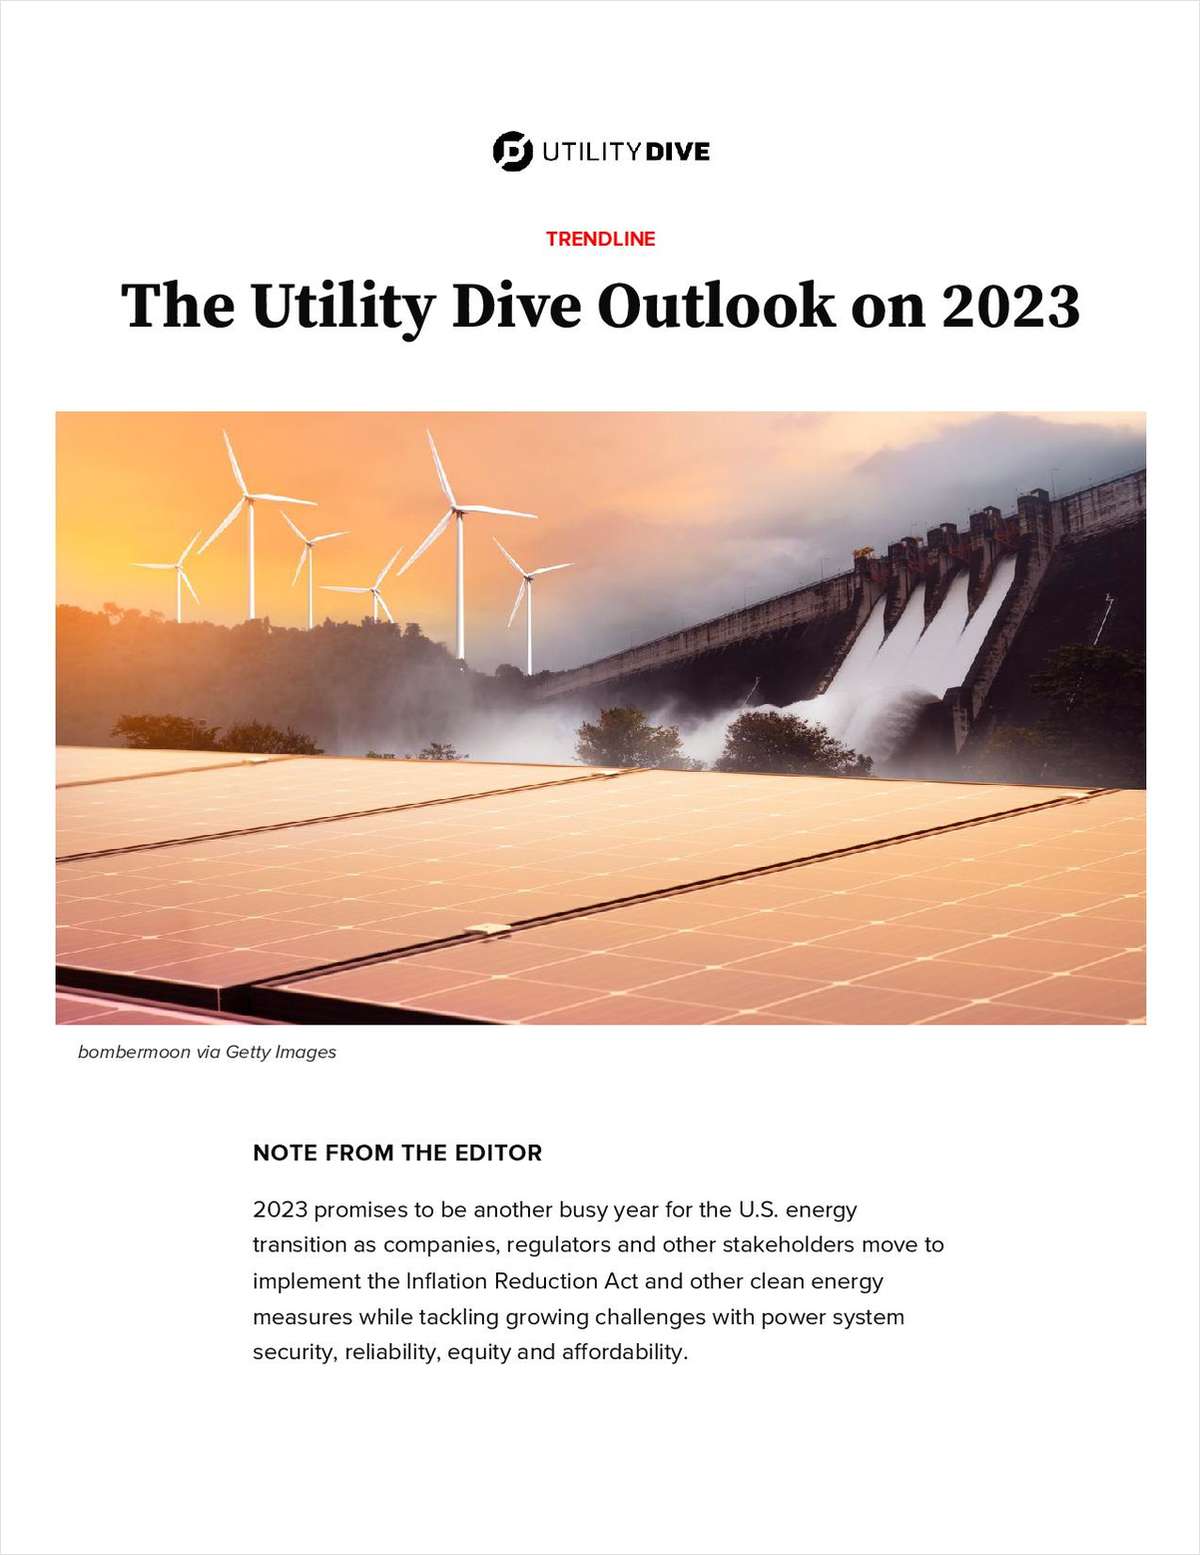 The Utility Dive Outlook on 2023